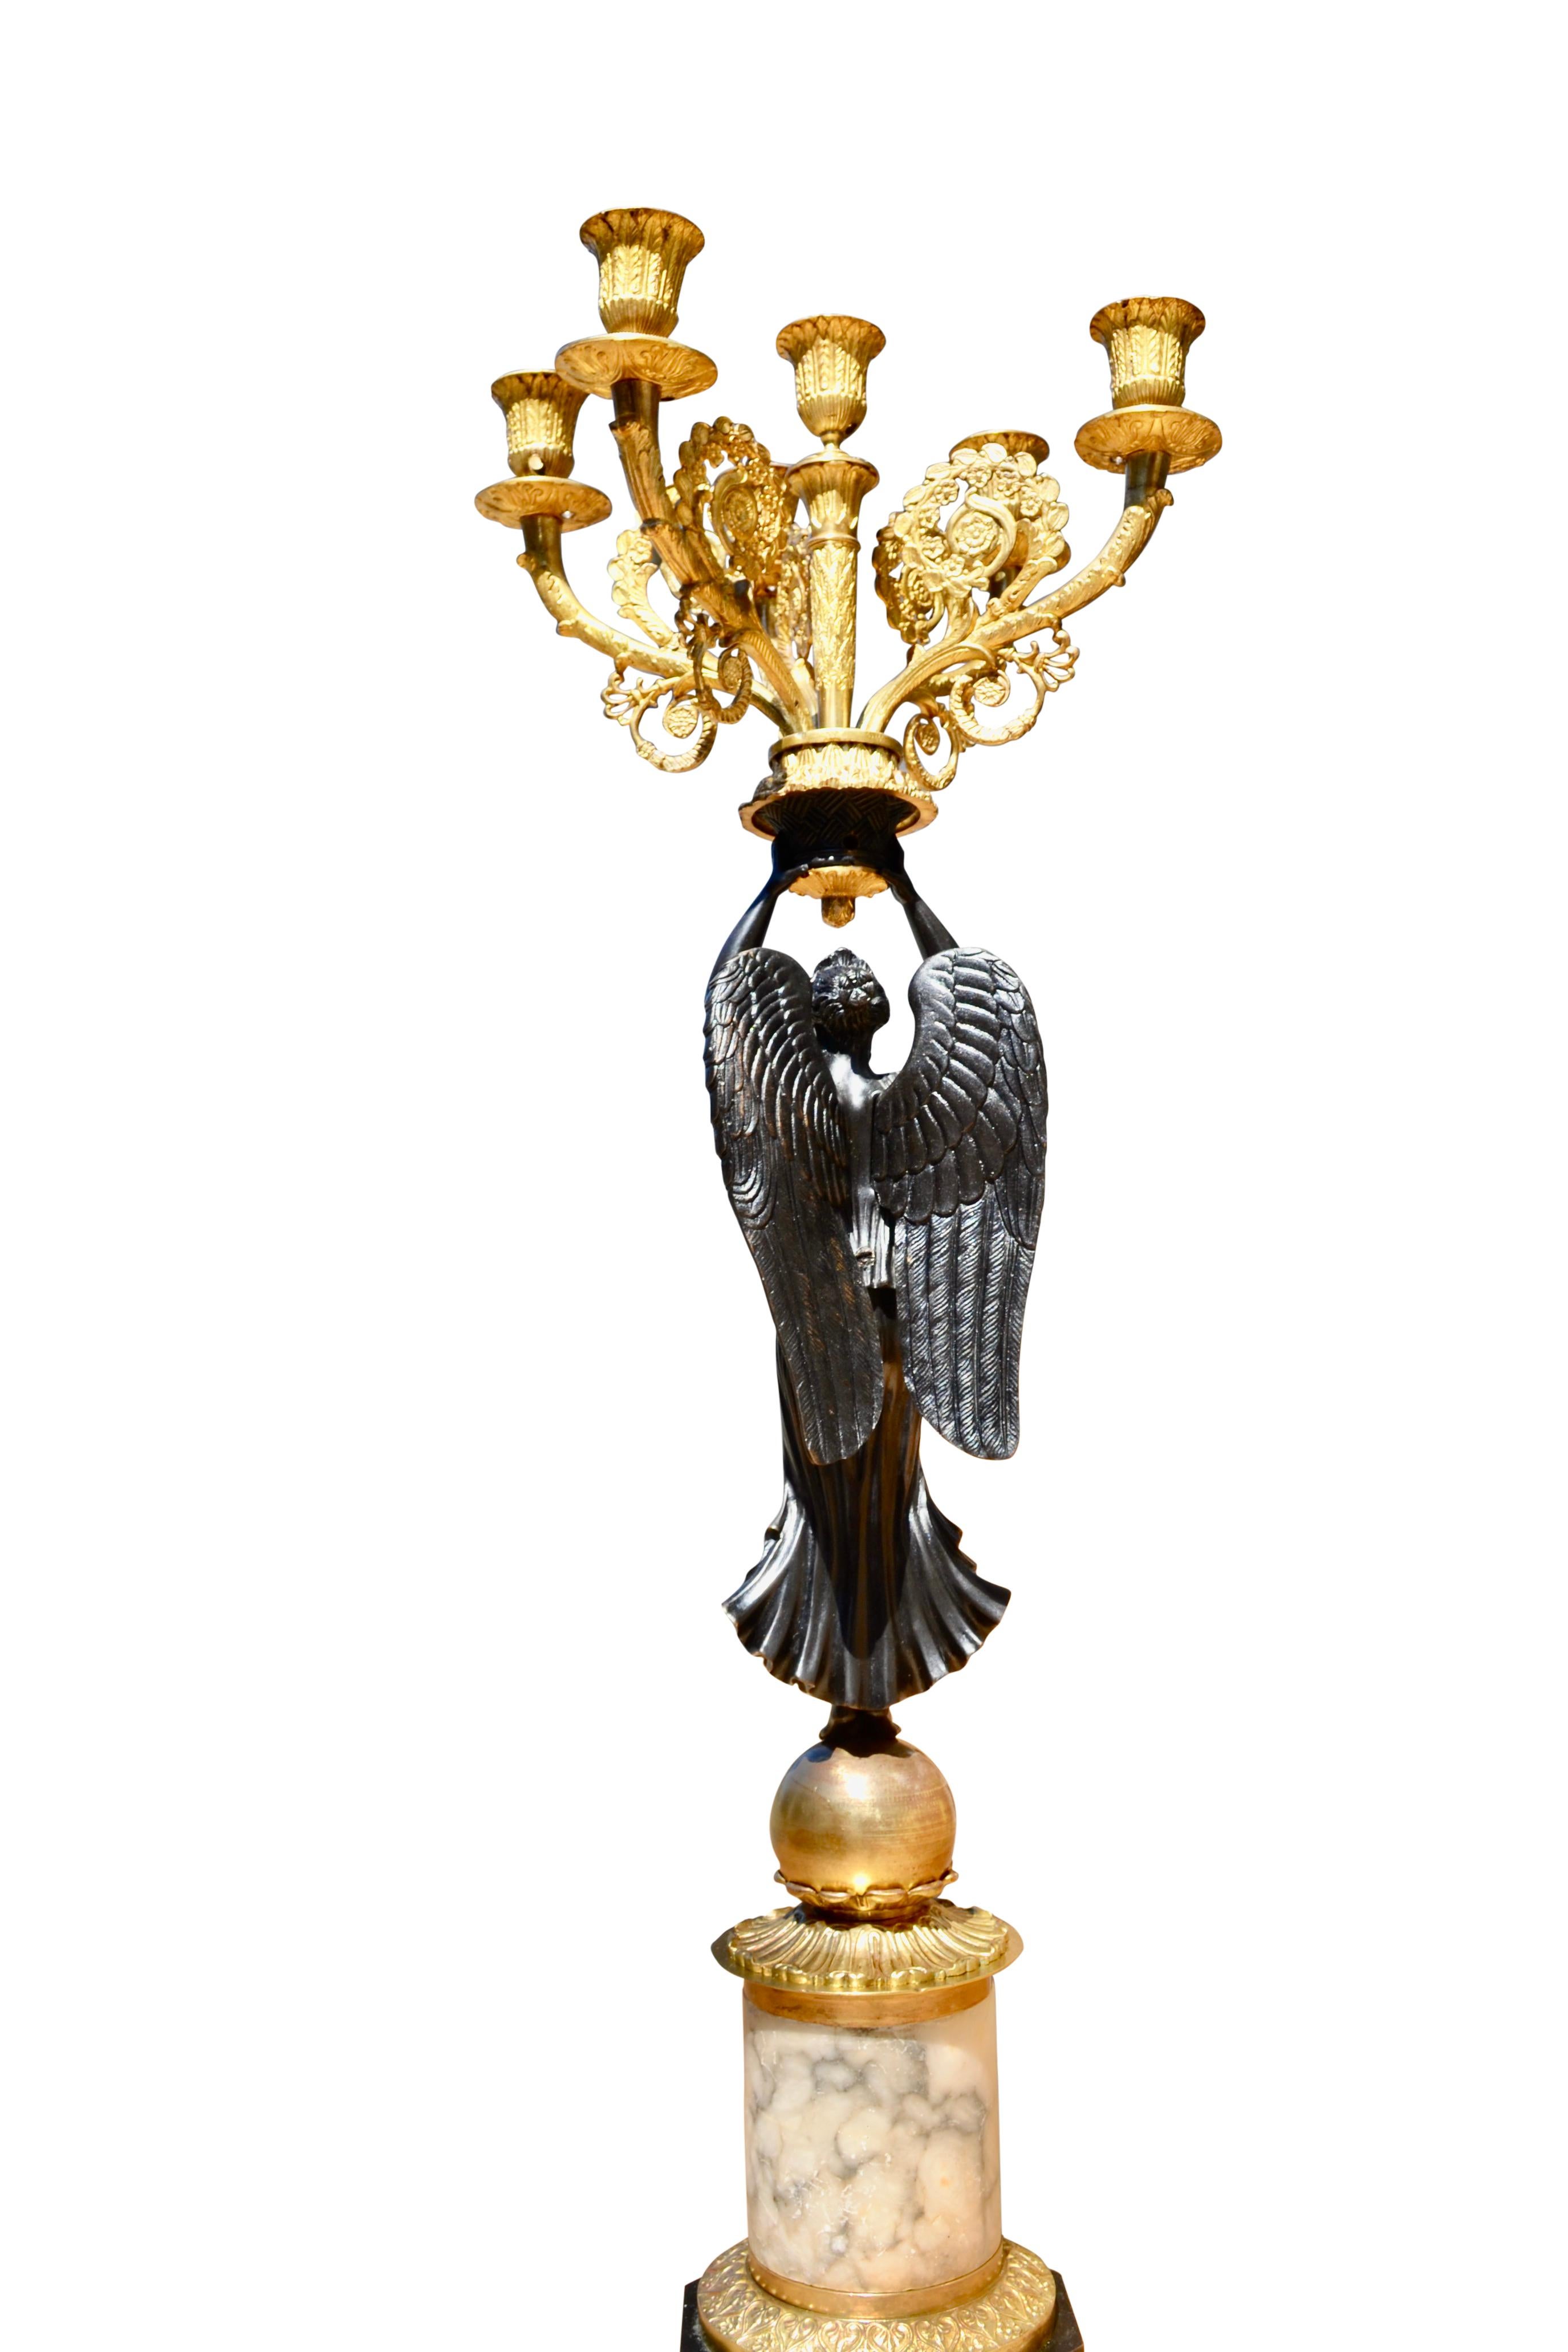 Single French Empire Style Patinated  and Gilt Bronze Winged Victory Candelabra For Sale 2